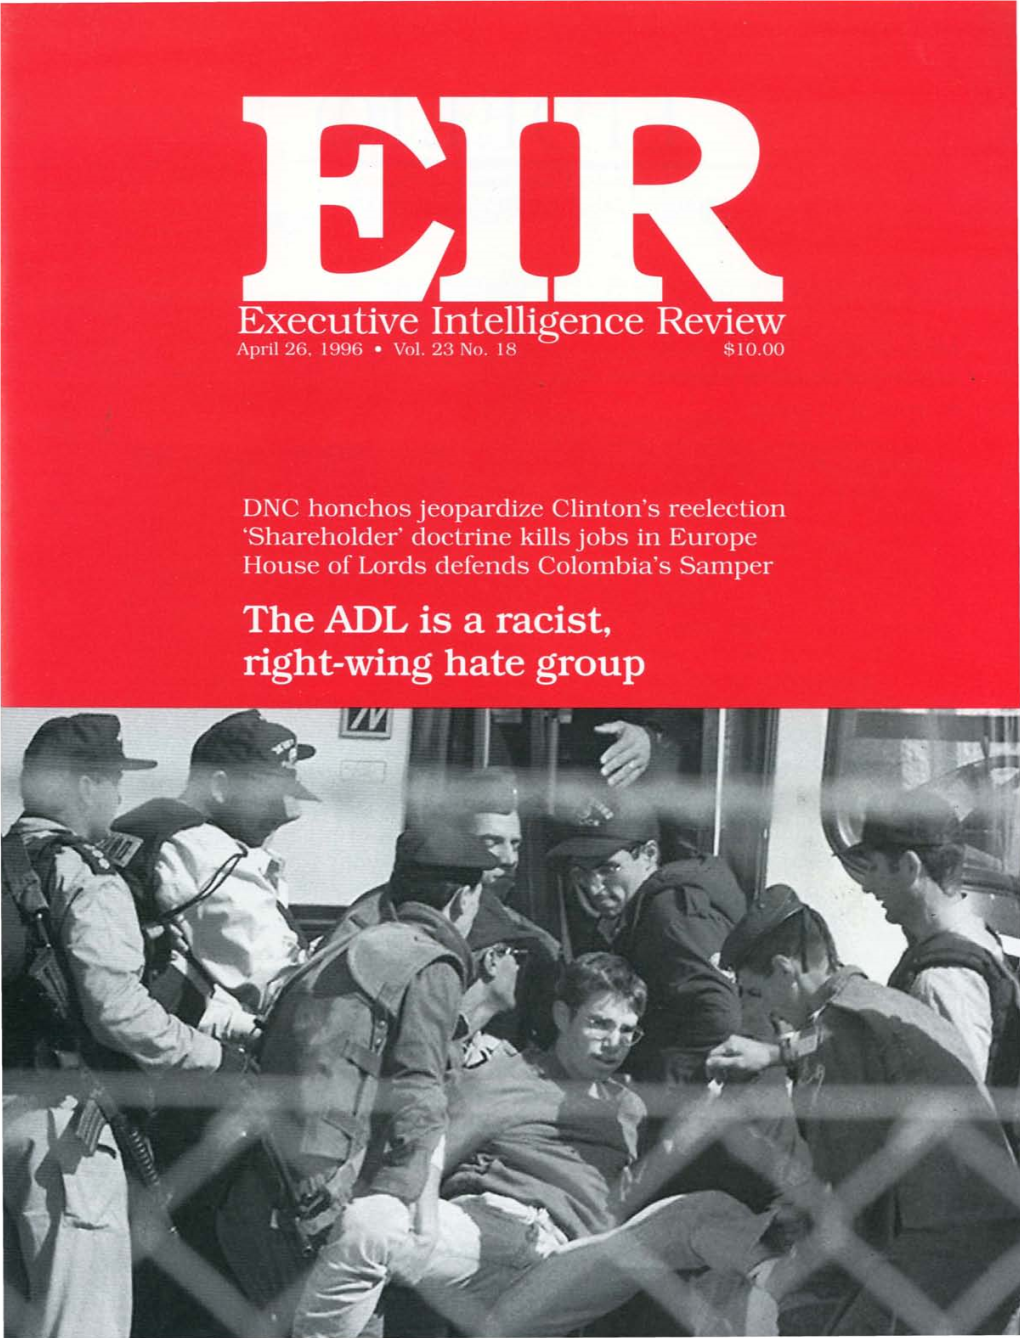 Executive Intelligence Review, Volume 23, Number 18, April 26, 1996